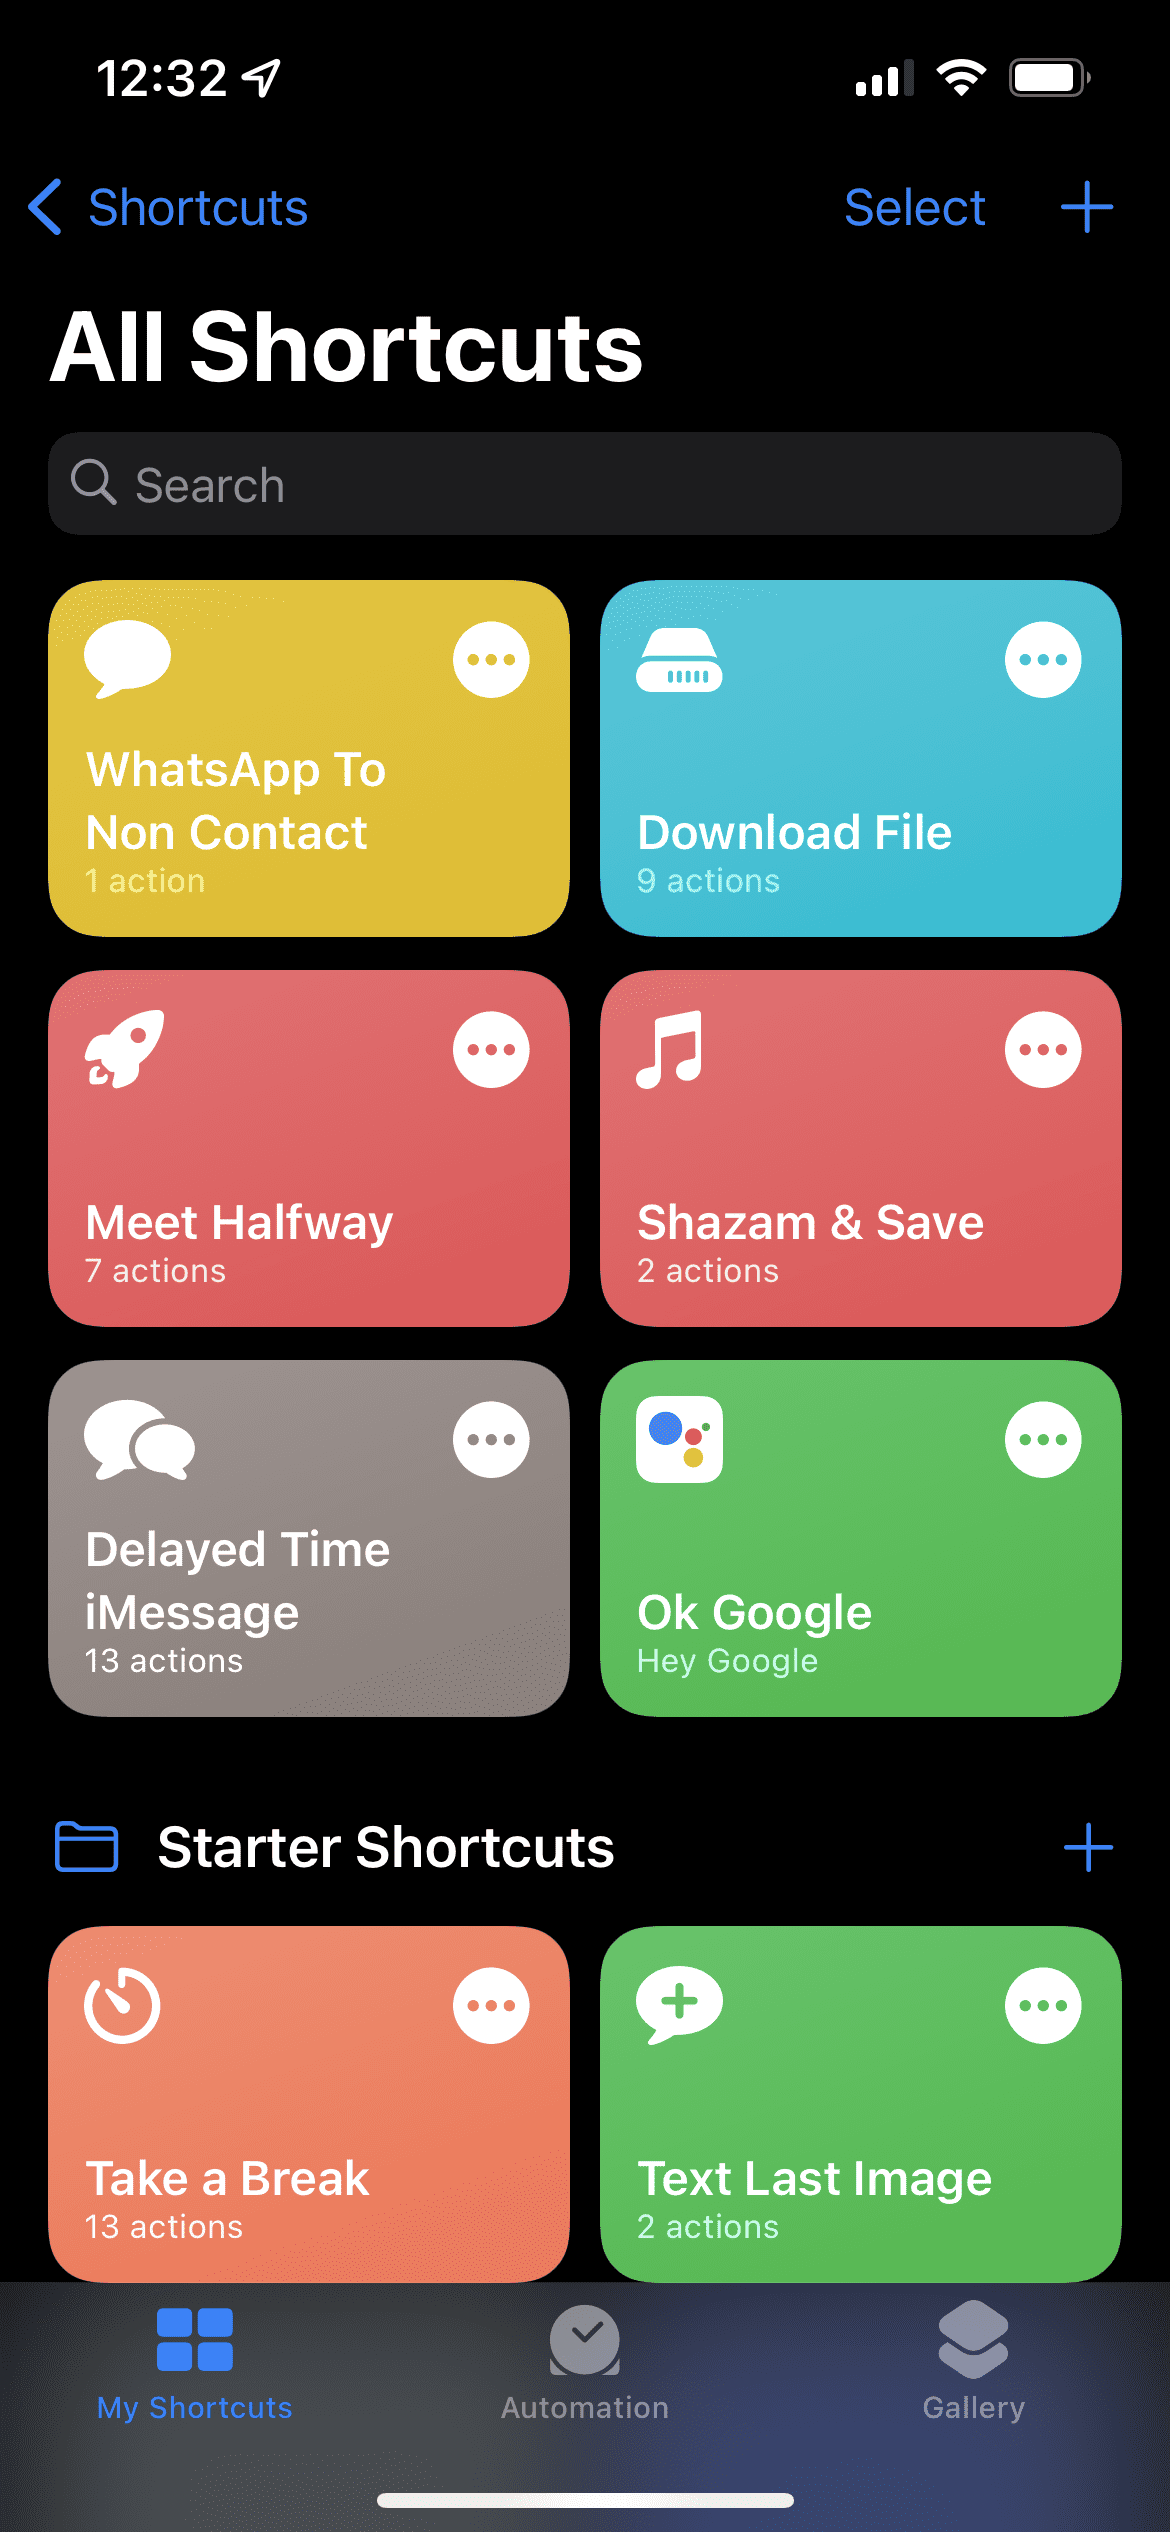 Shortcuts app on iPhone